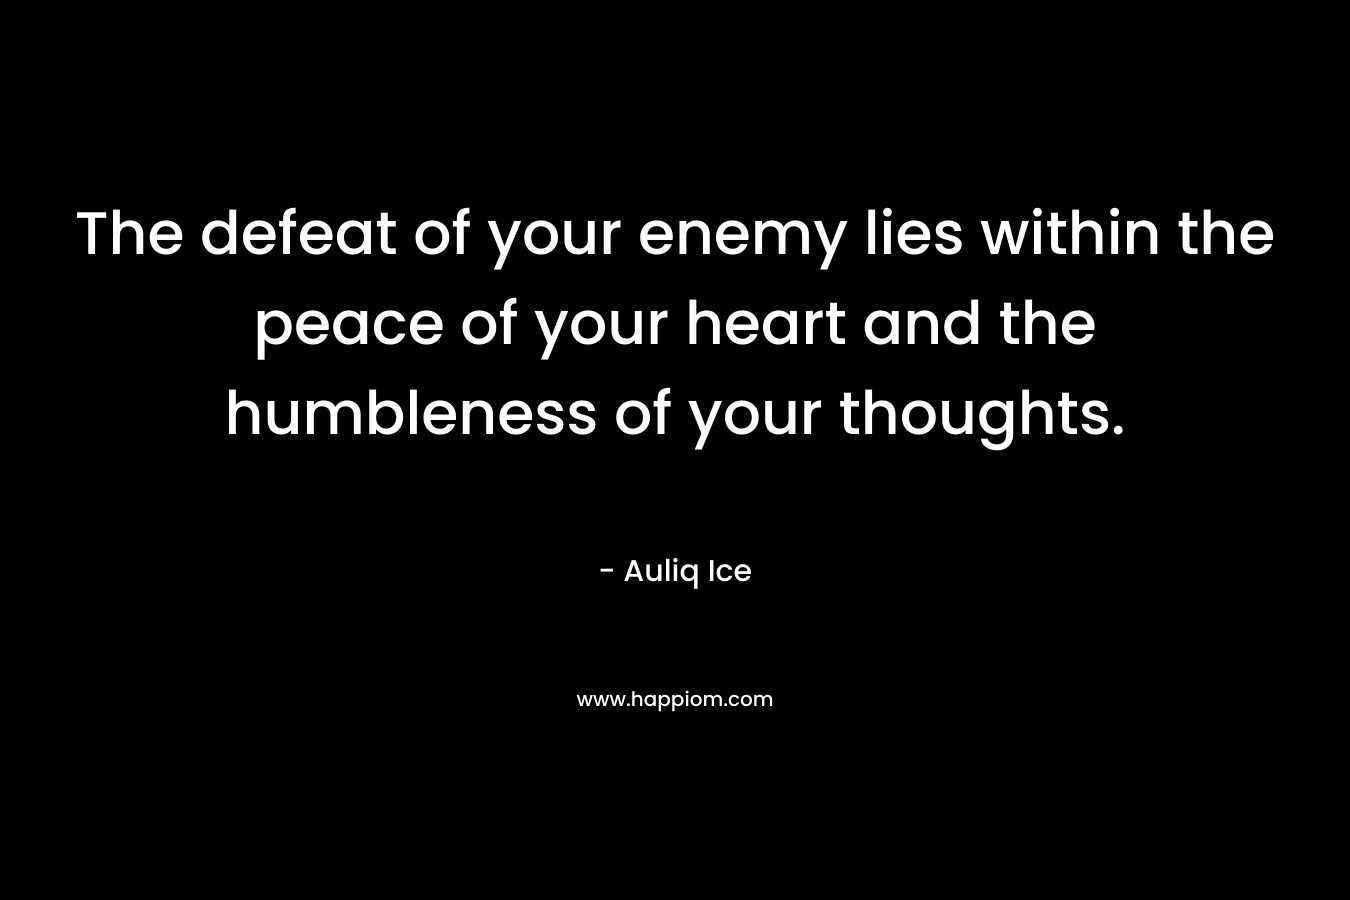 The defeat of your enemy lies within the peace of your heart and the humbleness of your thoughts. – Auliq Ice